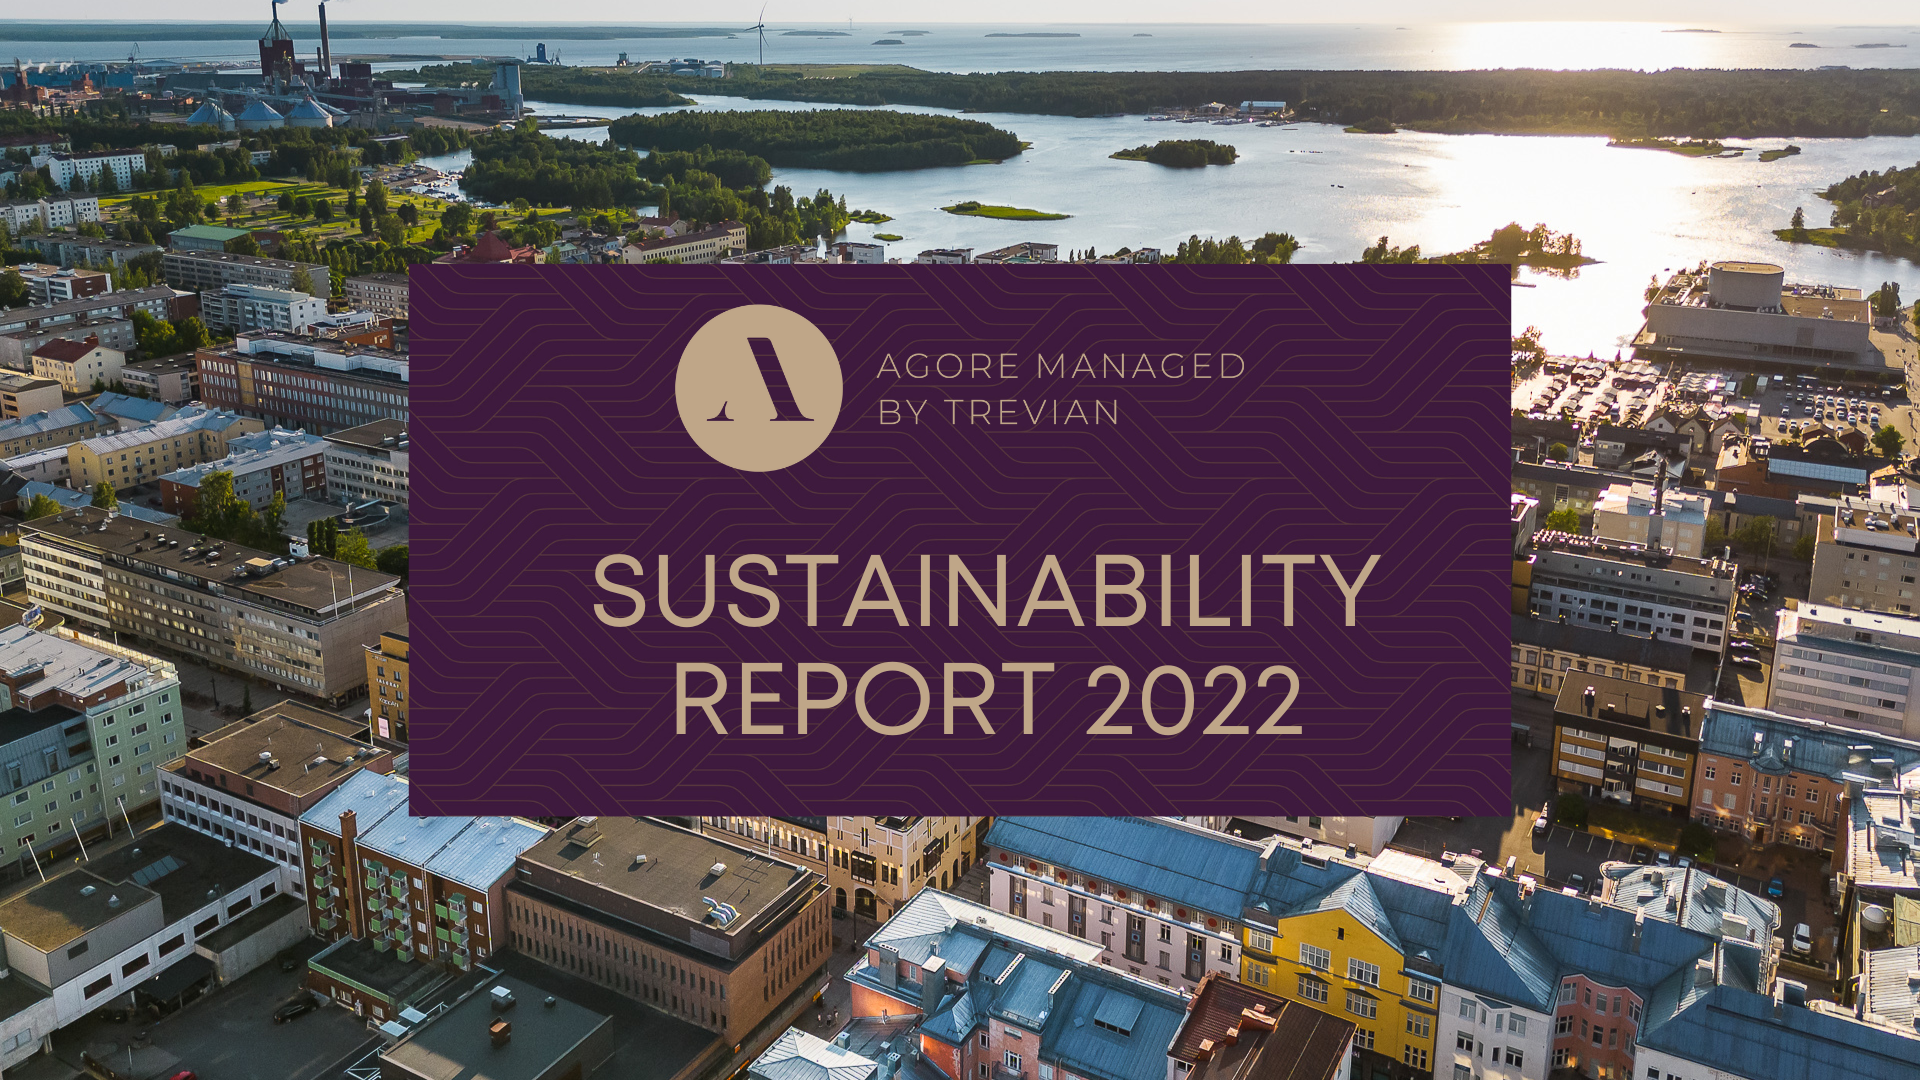 Featured image for “Agore Properties Values Are Highlighted in Newly Published Sustainability Report”